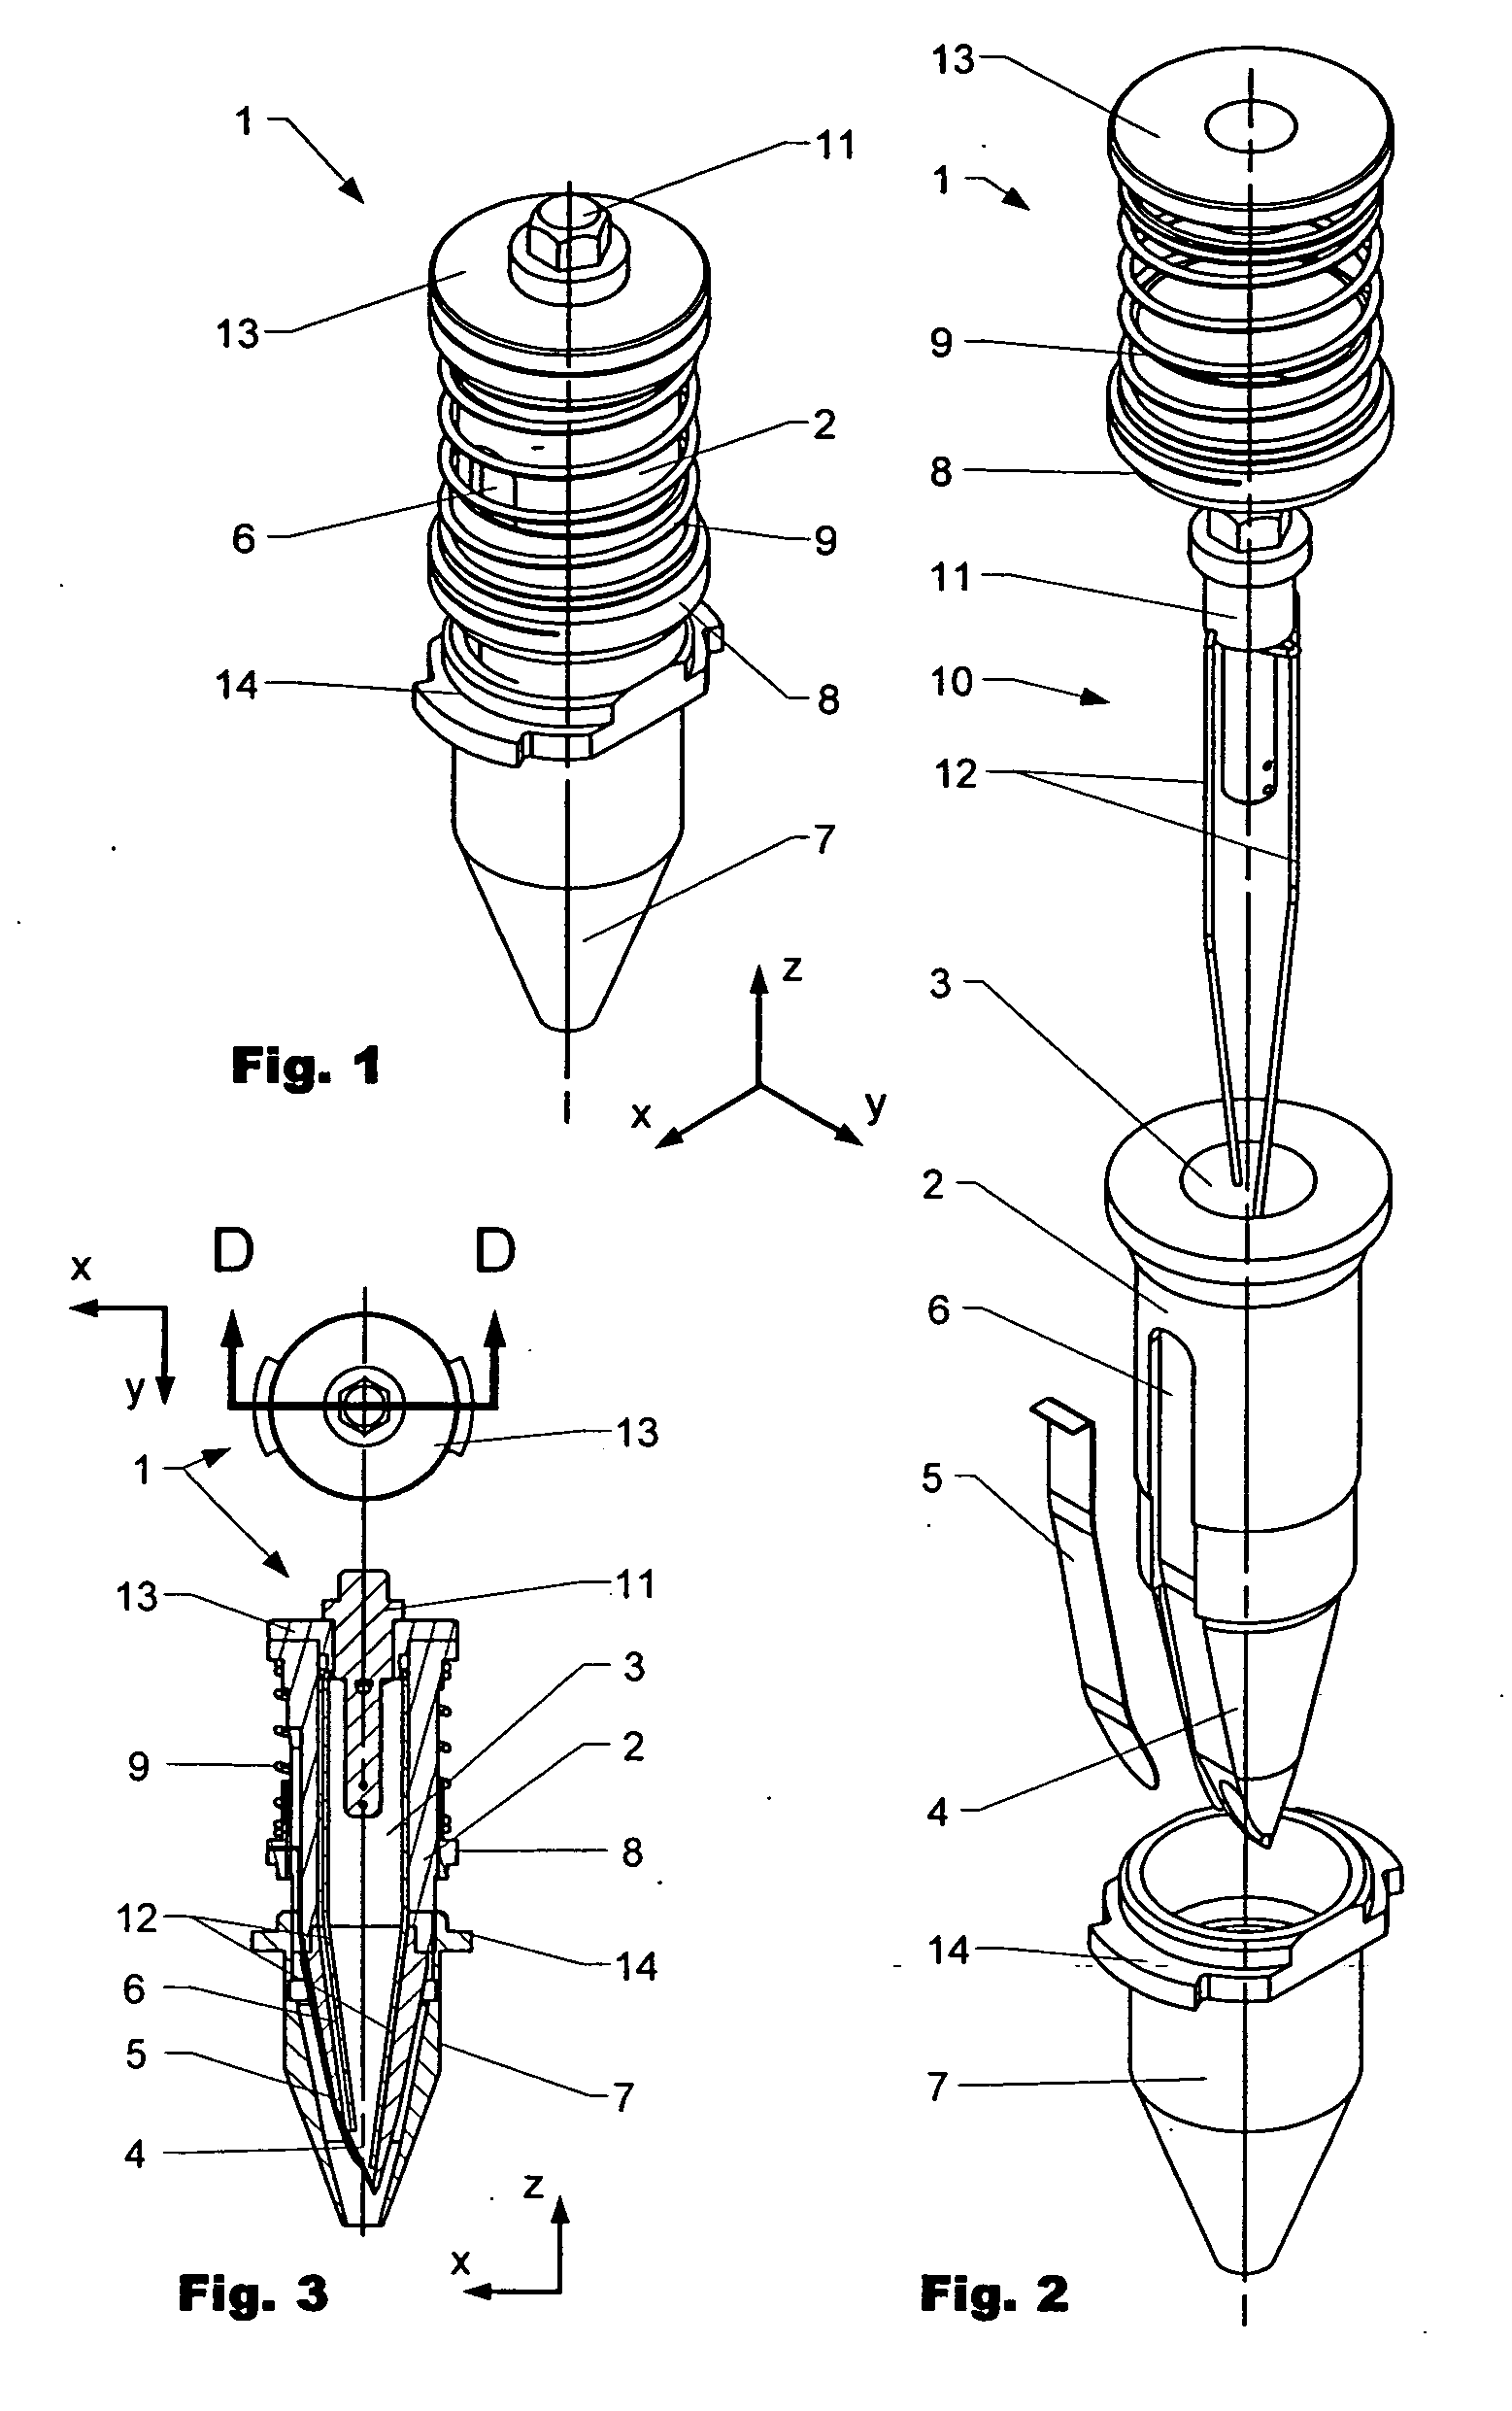 Apparatus and method for storing and dispensing material, especially in micro quantities and in combination with limited starting amounts